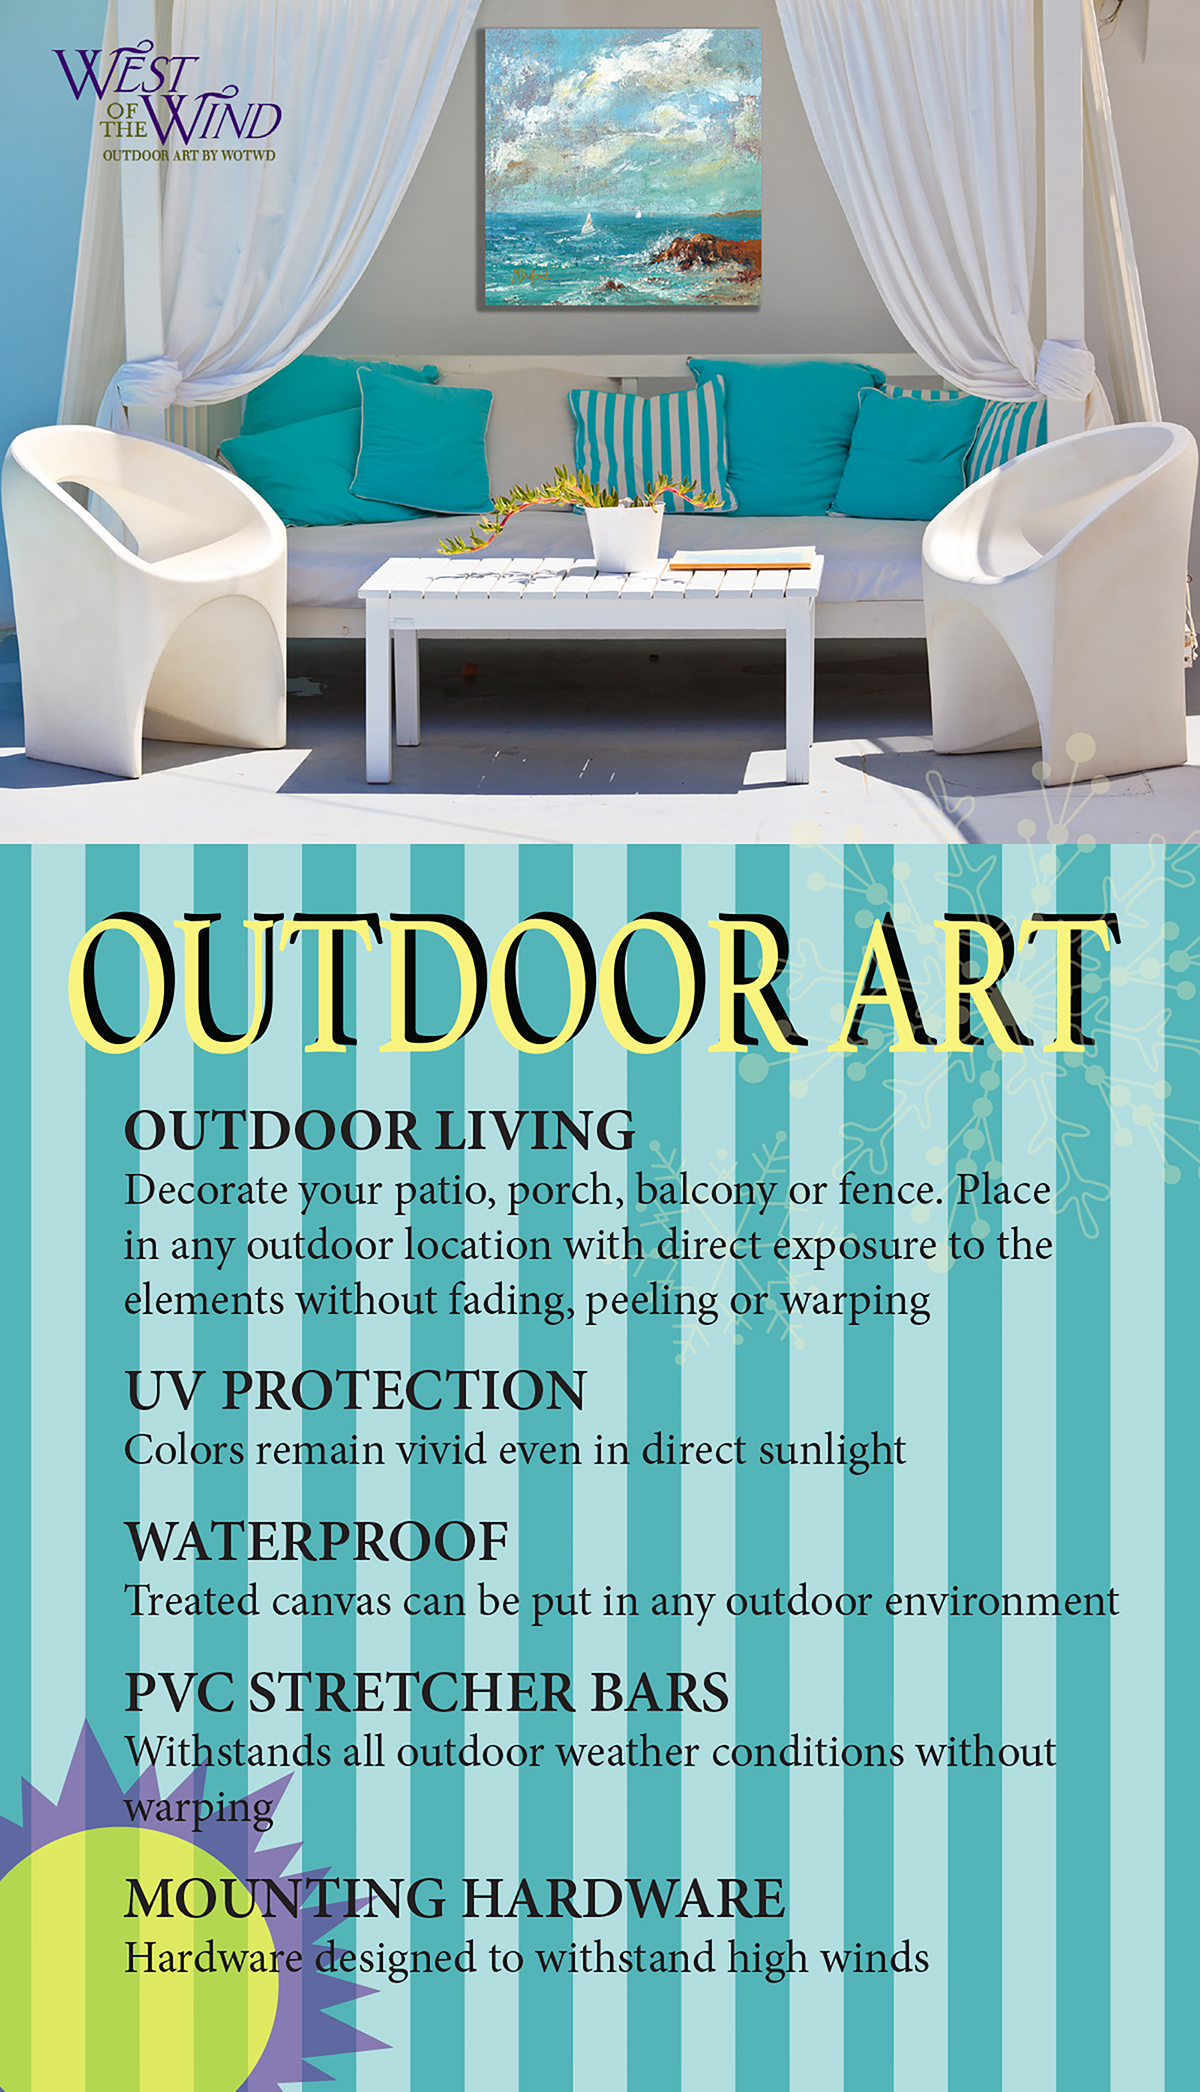 photo editing Outdoor Art product tag